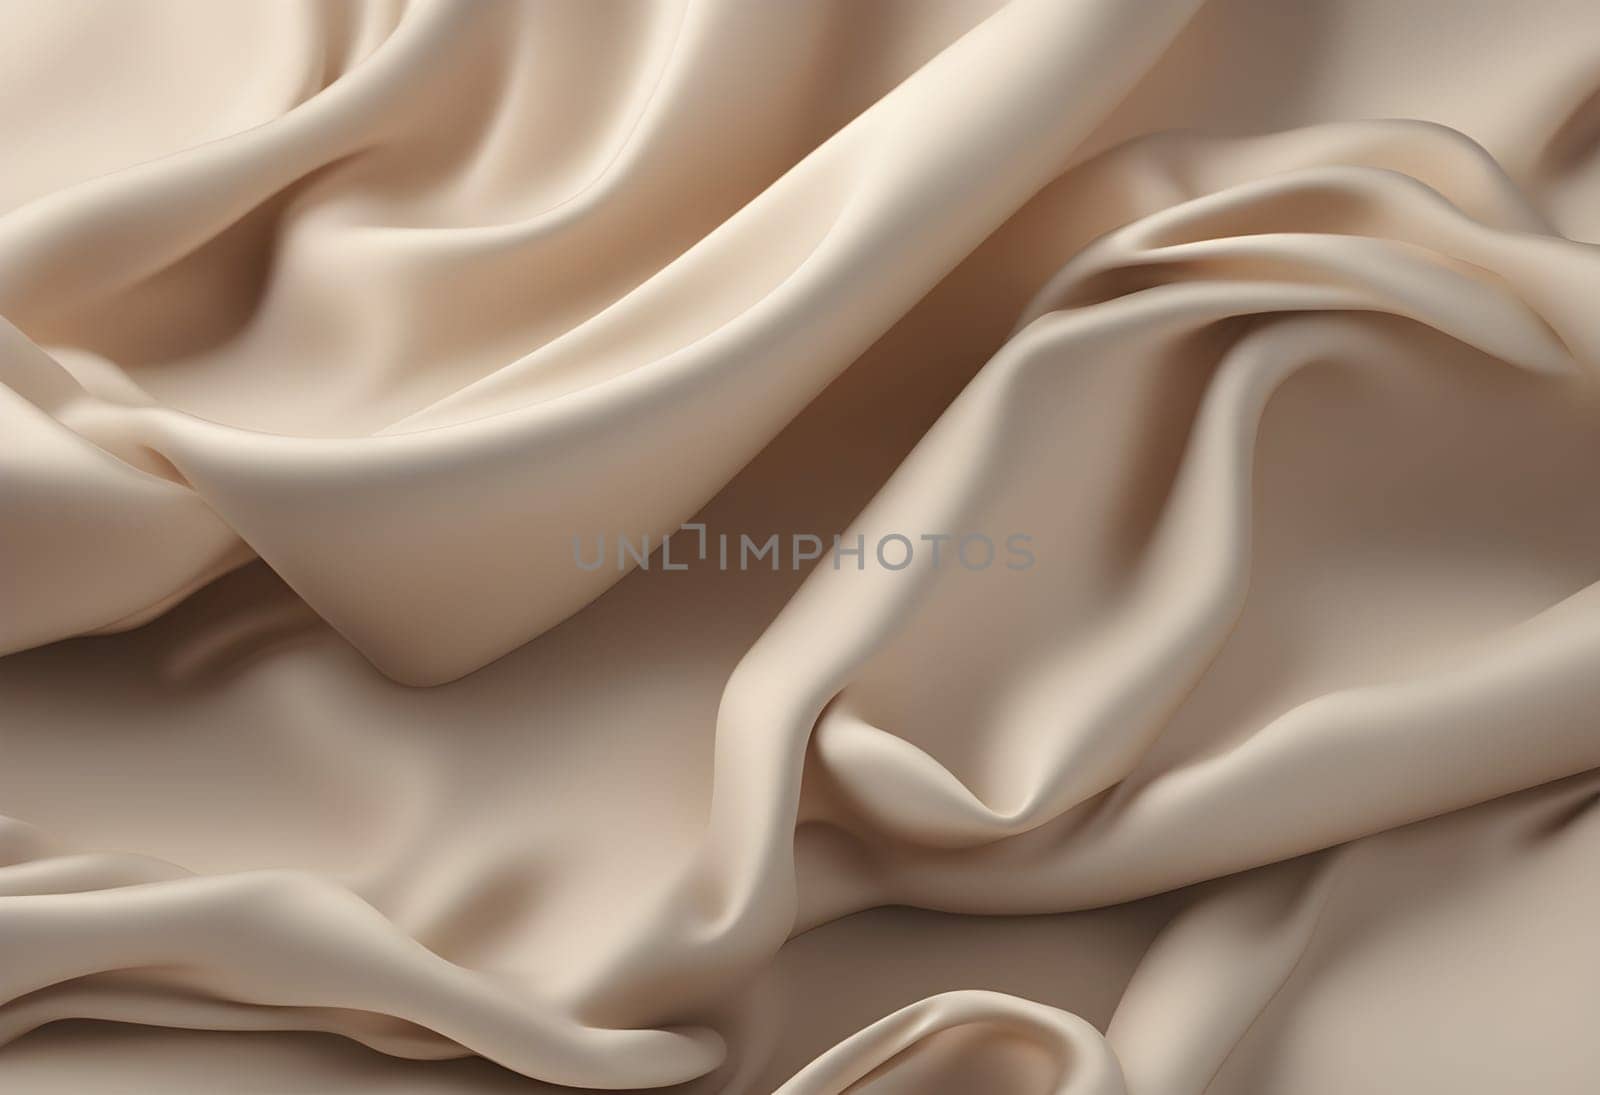 Technology background realistic color background folds of fabric or overlay for product or in shades of light beige color Generate AI